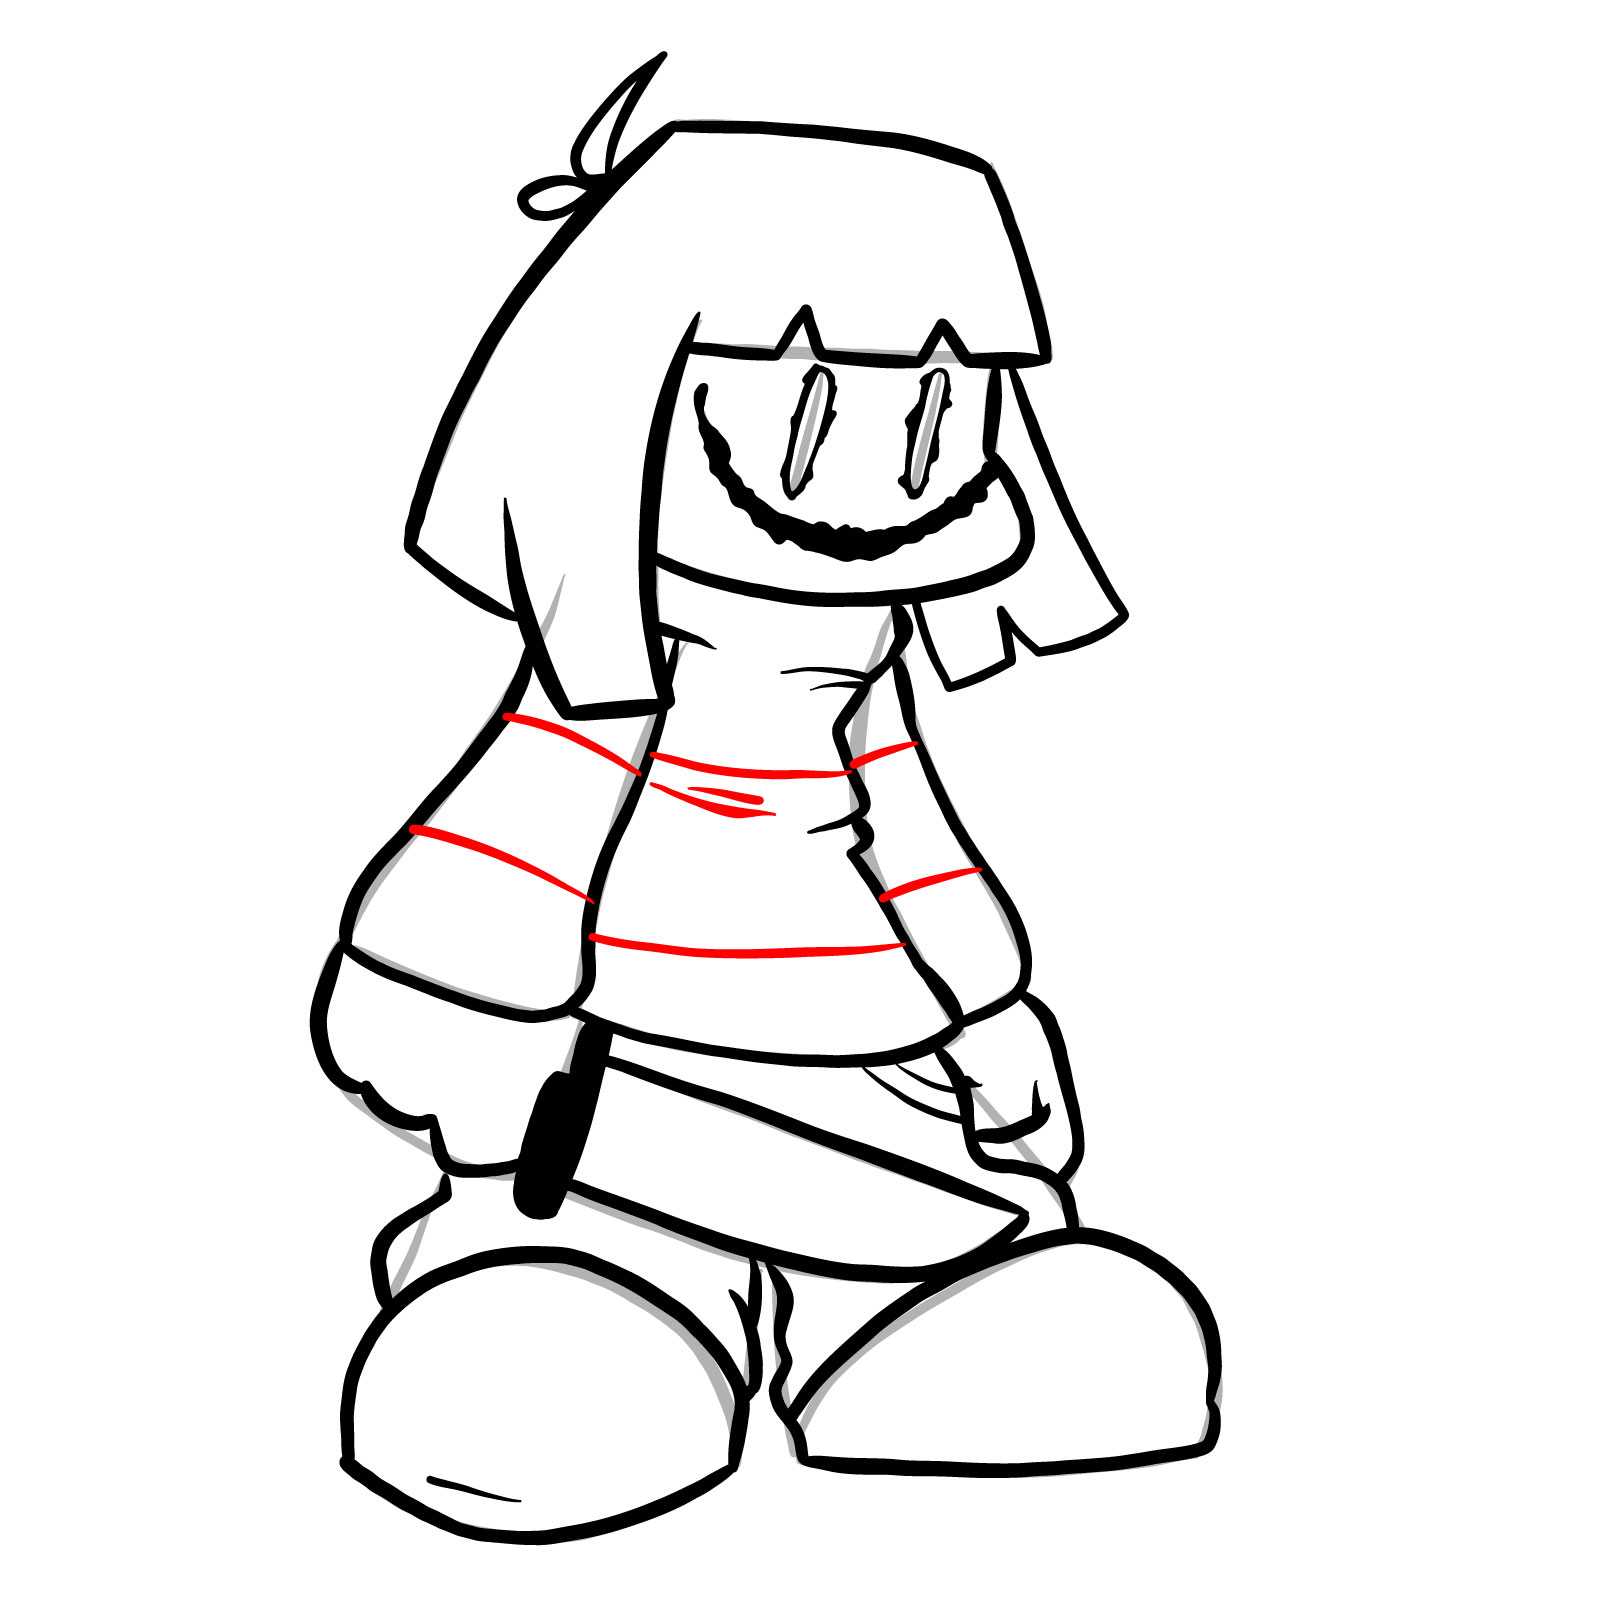 How to draw Chara from Friday Night Dustin' - step 22